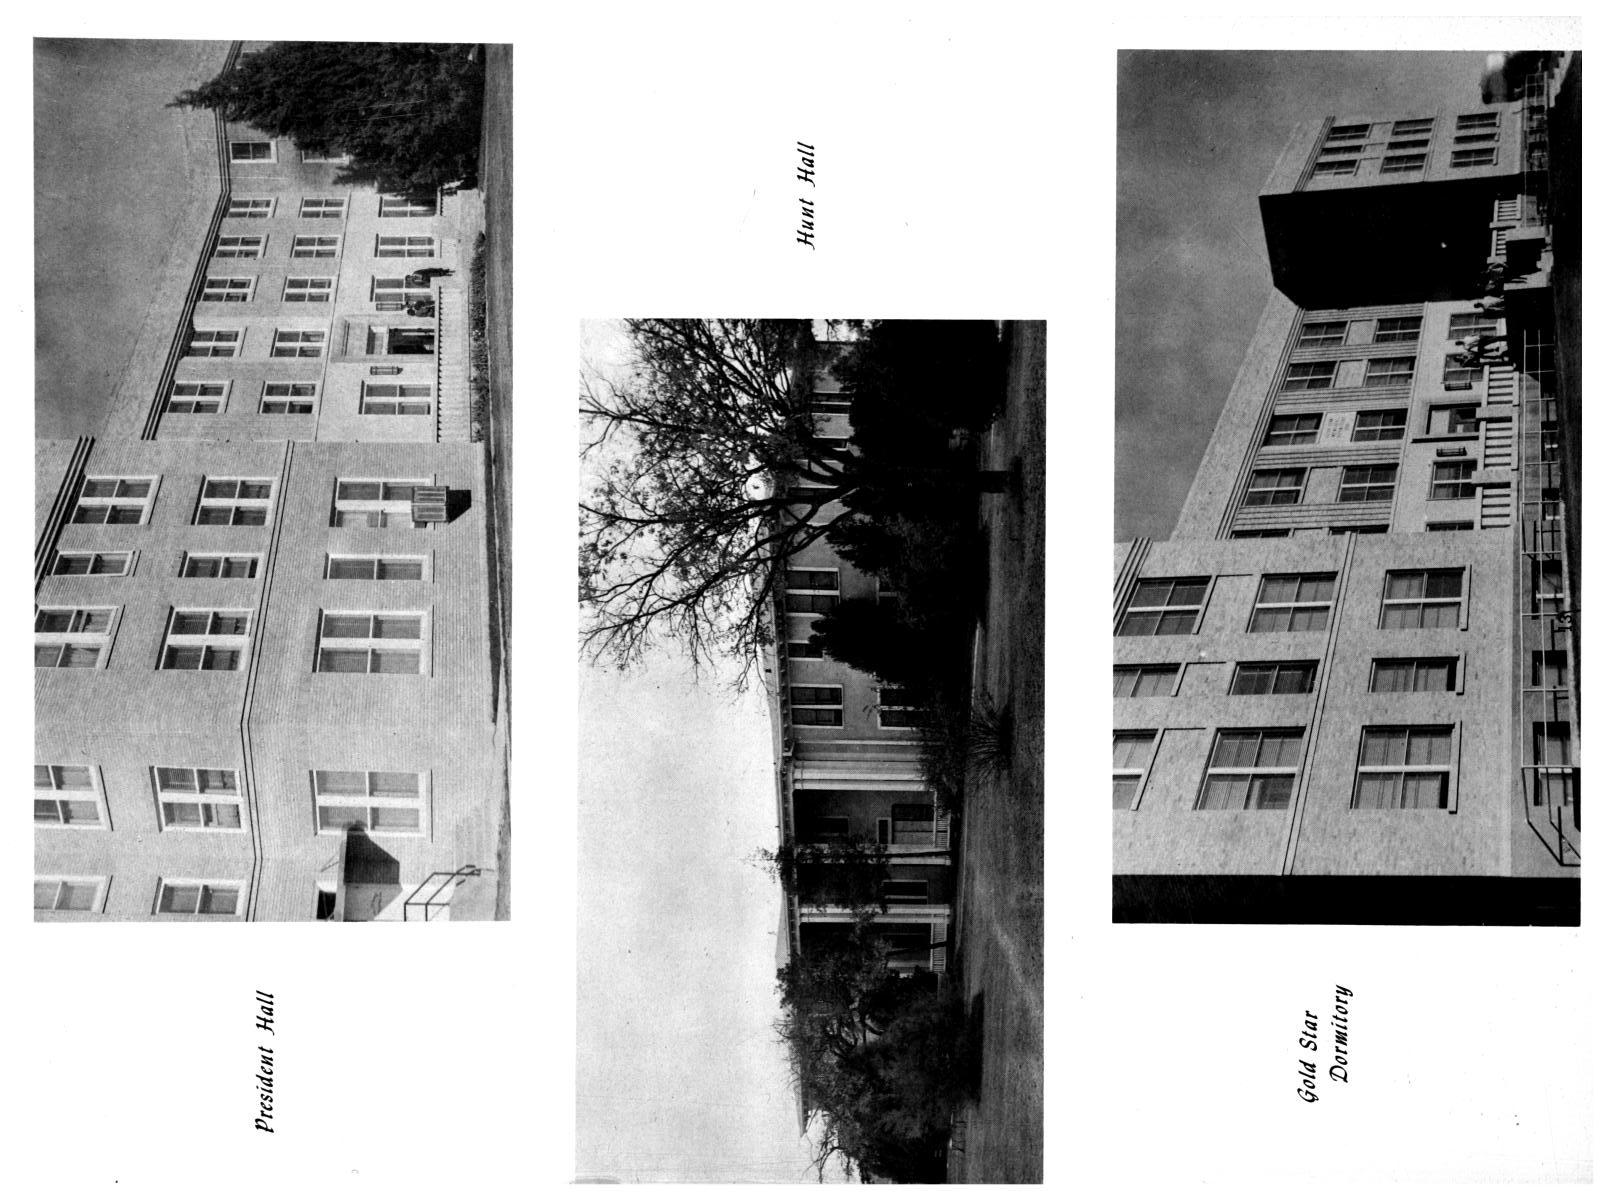 The Totem, Yearbook of McMurry College, 1959
                                                
                                                    13
                                                